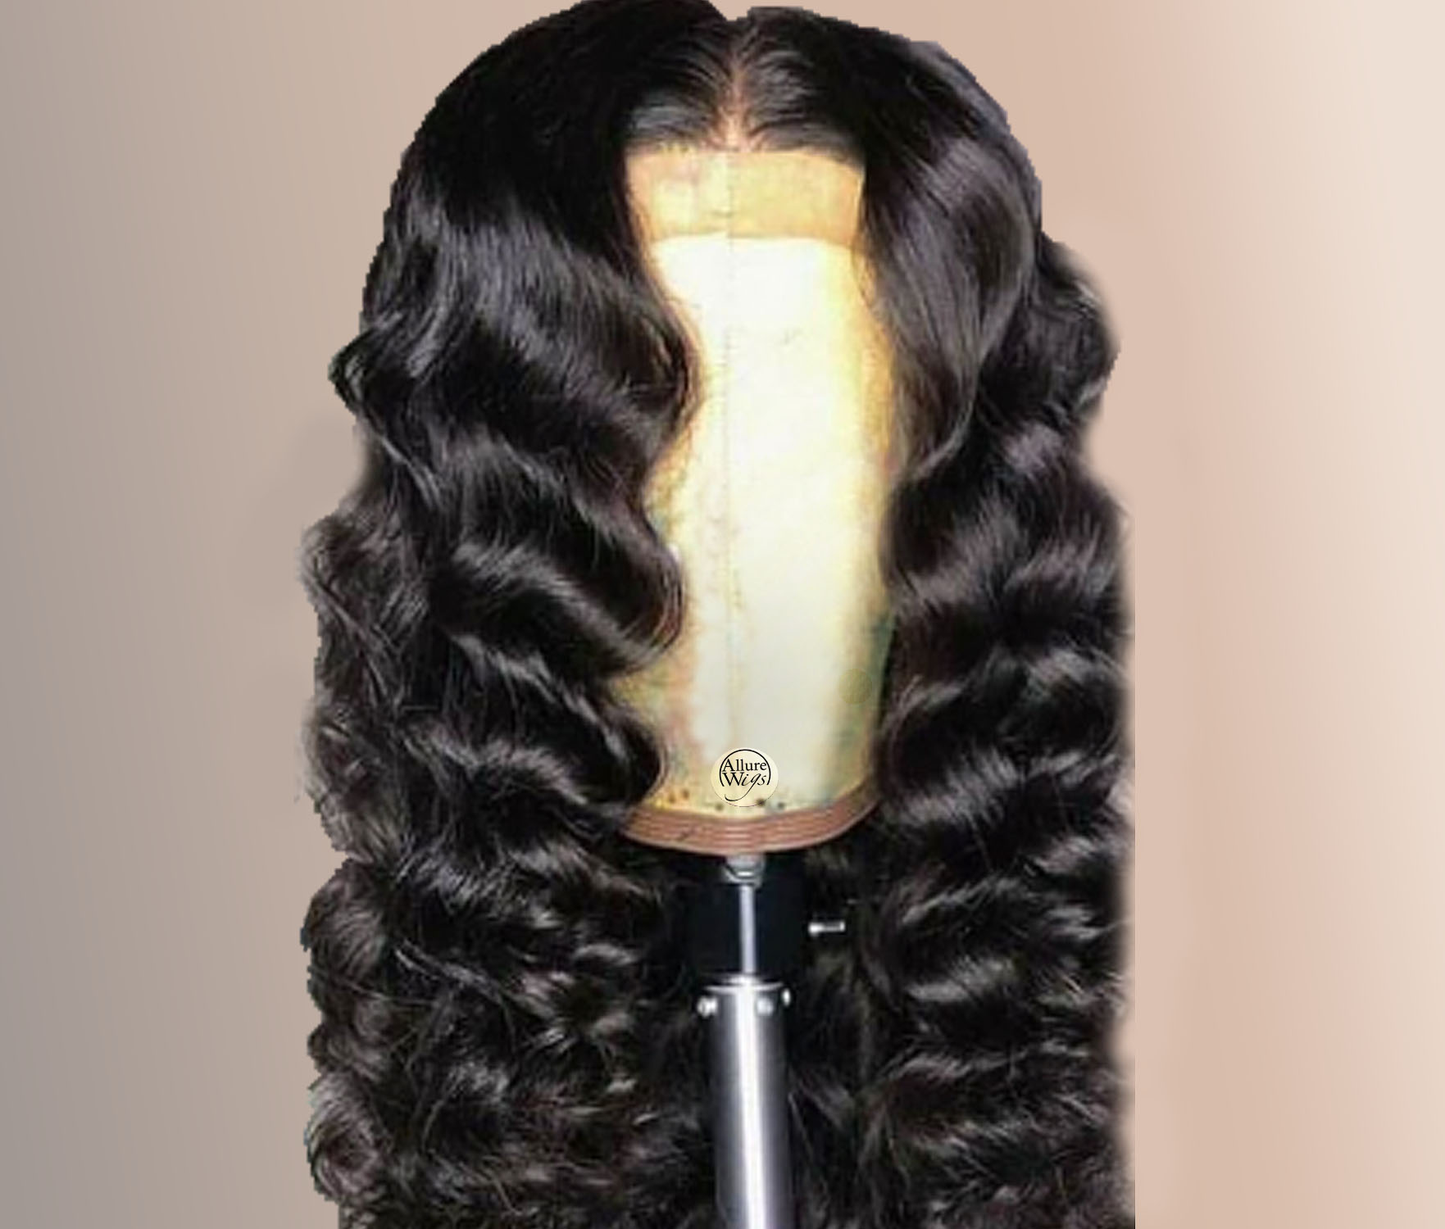 Allure-Wigs-Inc-human-hair-lace-wigs-curly